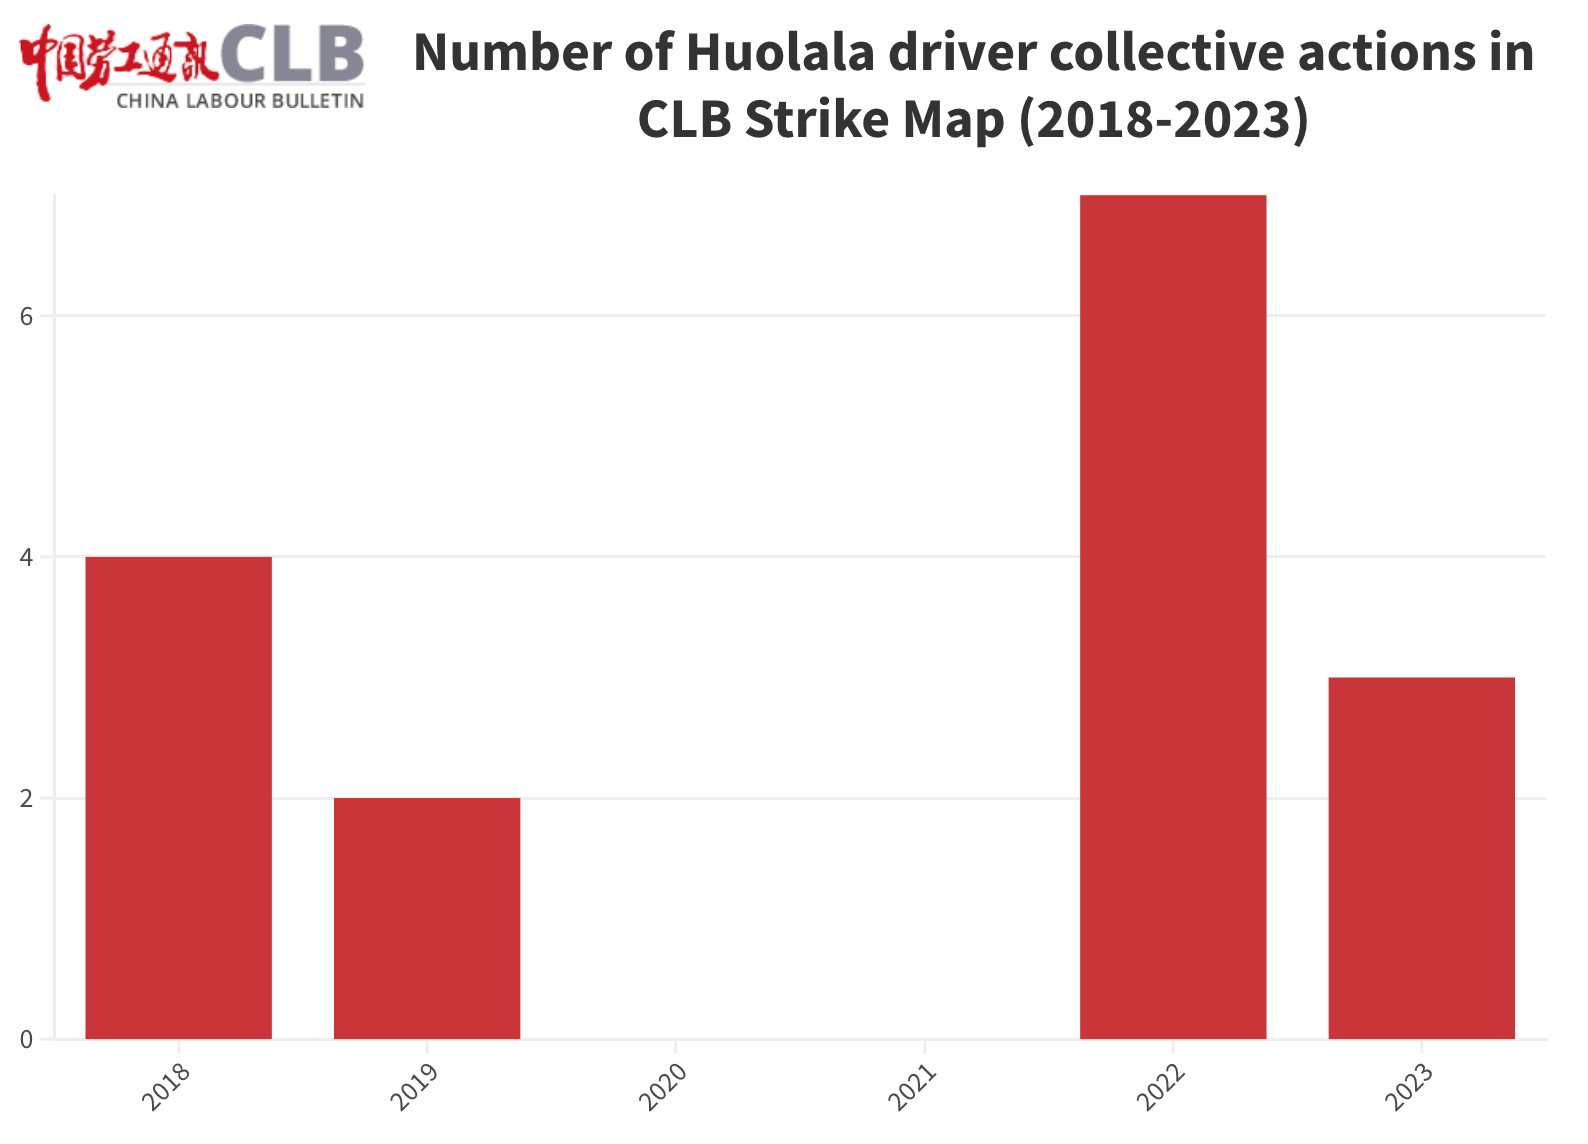 CLB Strike Map data on Huolala driver protests since 2018